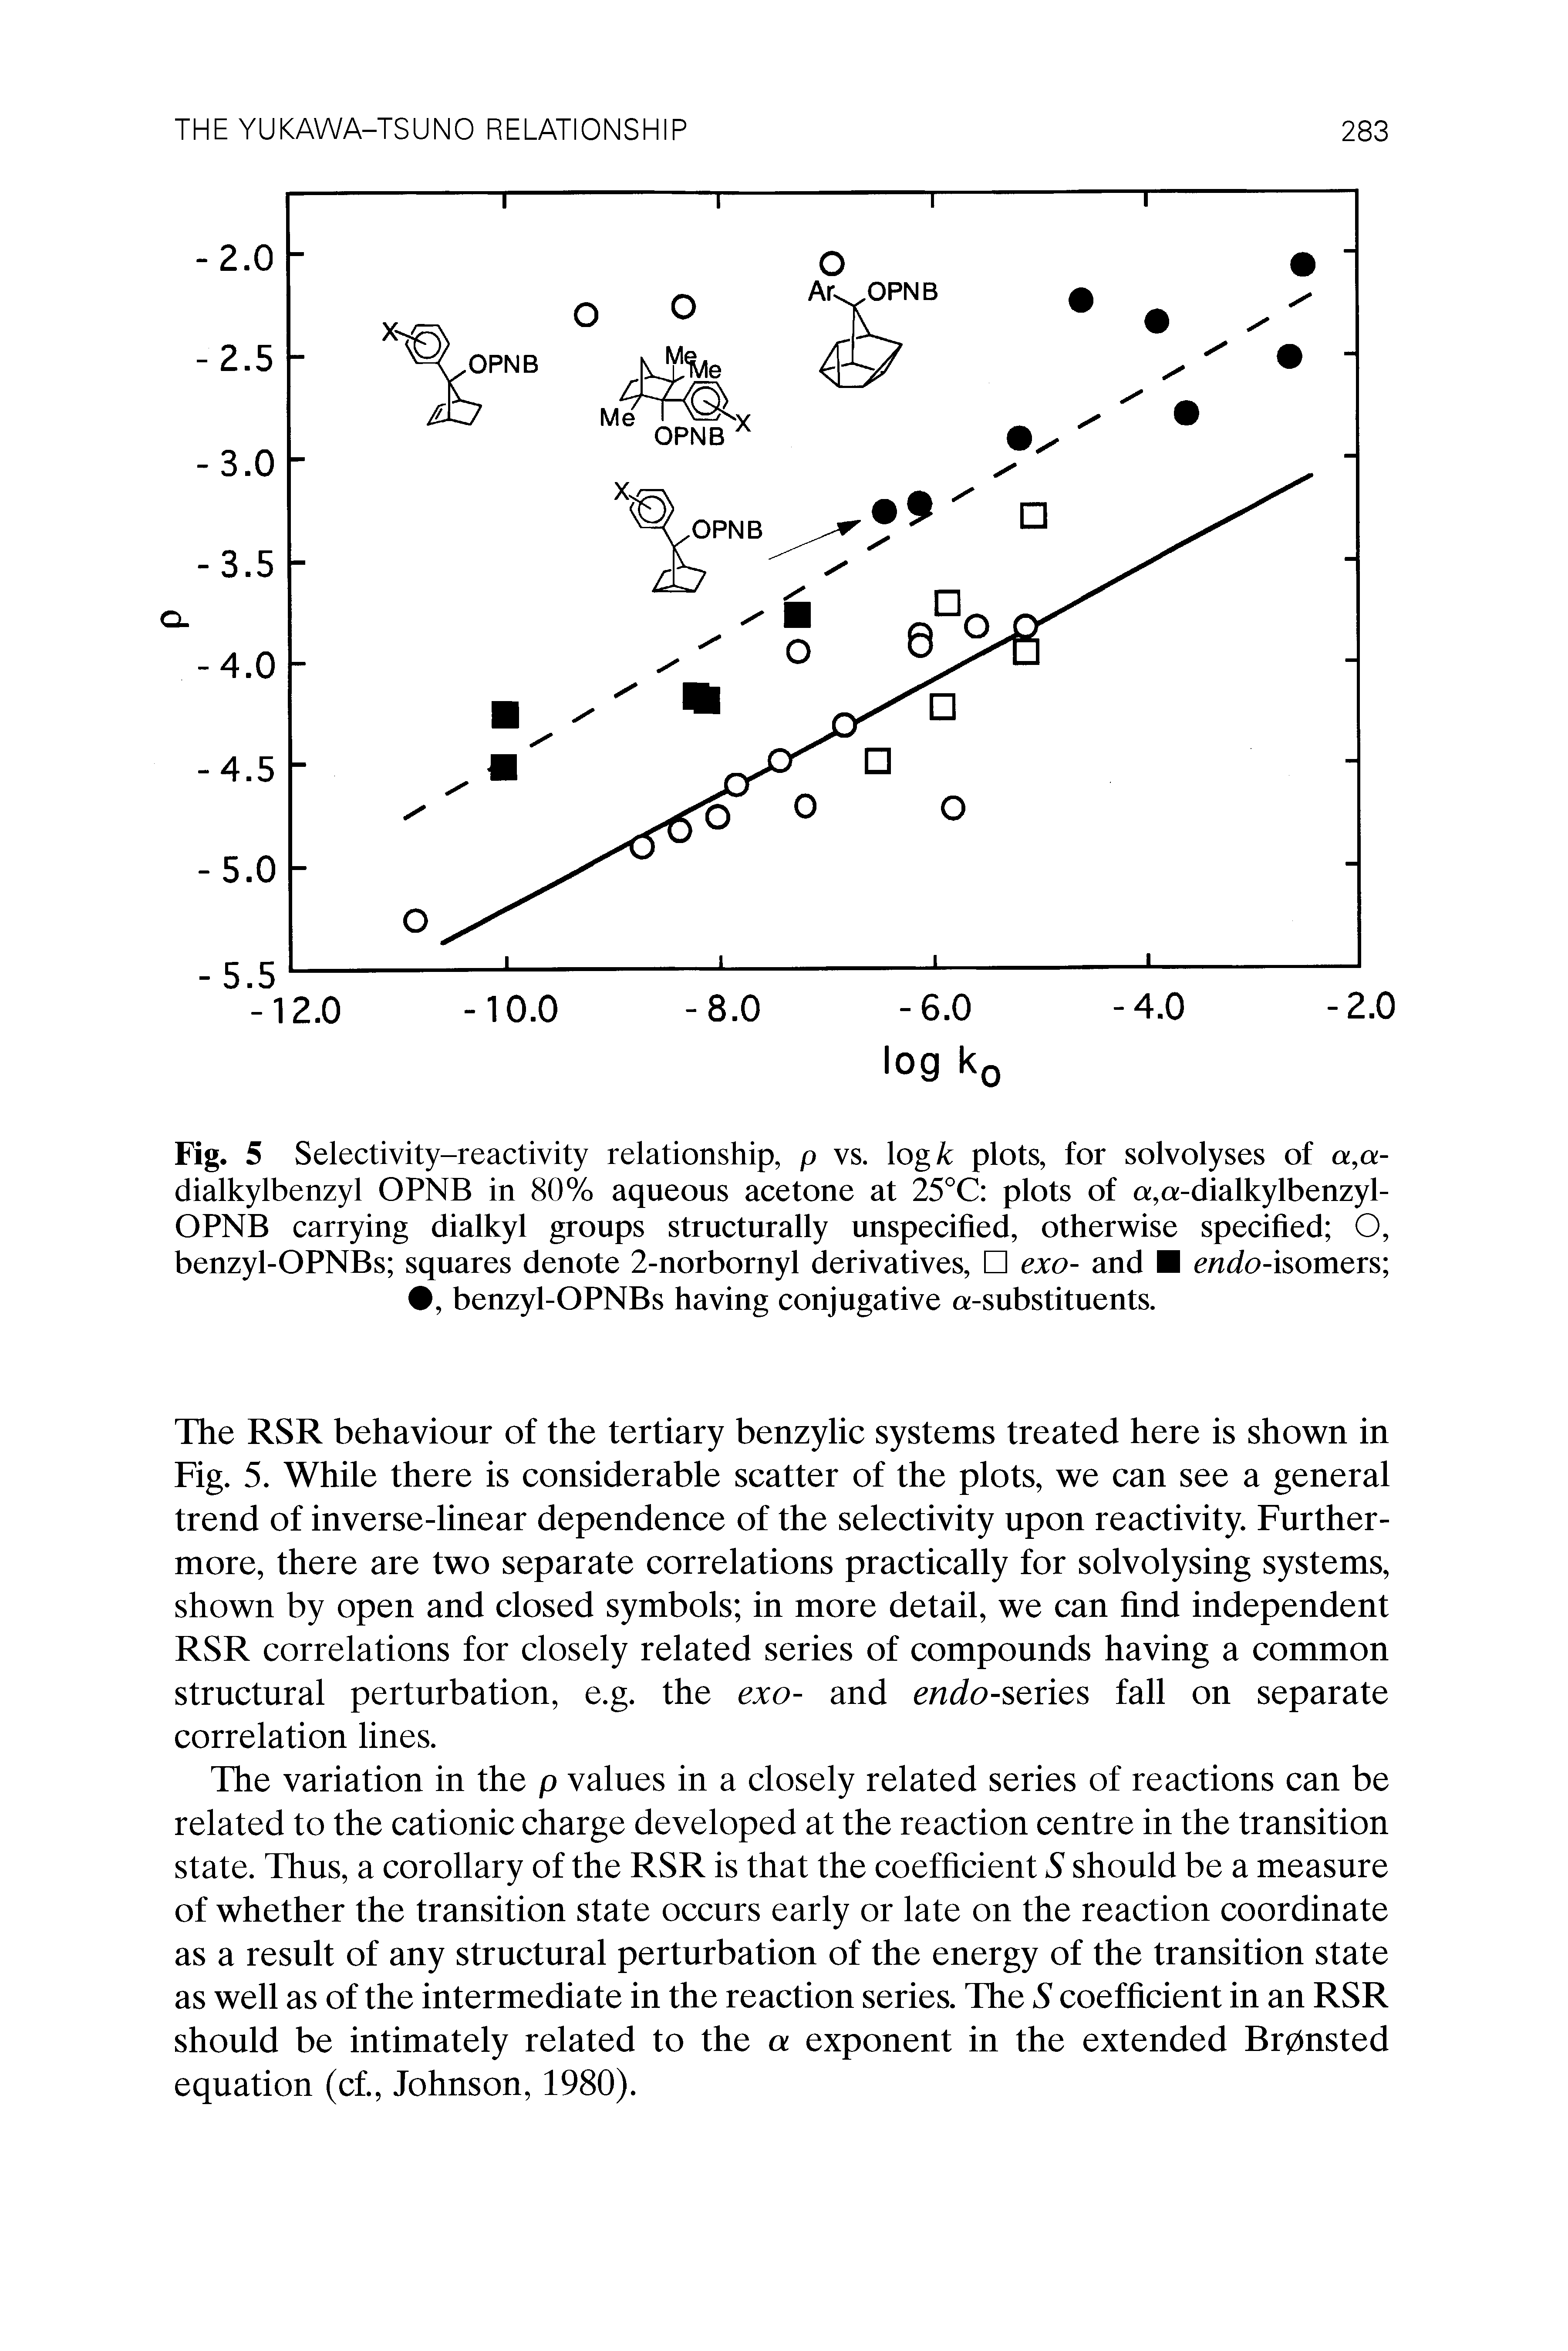 Fig. 5 Selectivity-reactivity relationship, p vs. log A plots, for solvolyses of a,a-dialkylbenzyl OPNB in 80% aqueous acetone at 25°C plots of a,a-dialkylbenzyl-OPNB carrying dialkyl groups structurally unspecified, otherwise specified O, benzyl-OPNBs squares denote 2-norbornyl derivatives, exo- and endo-isomors , benzyl-OPNBs having conjugative a-substituents.